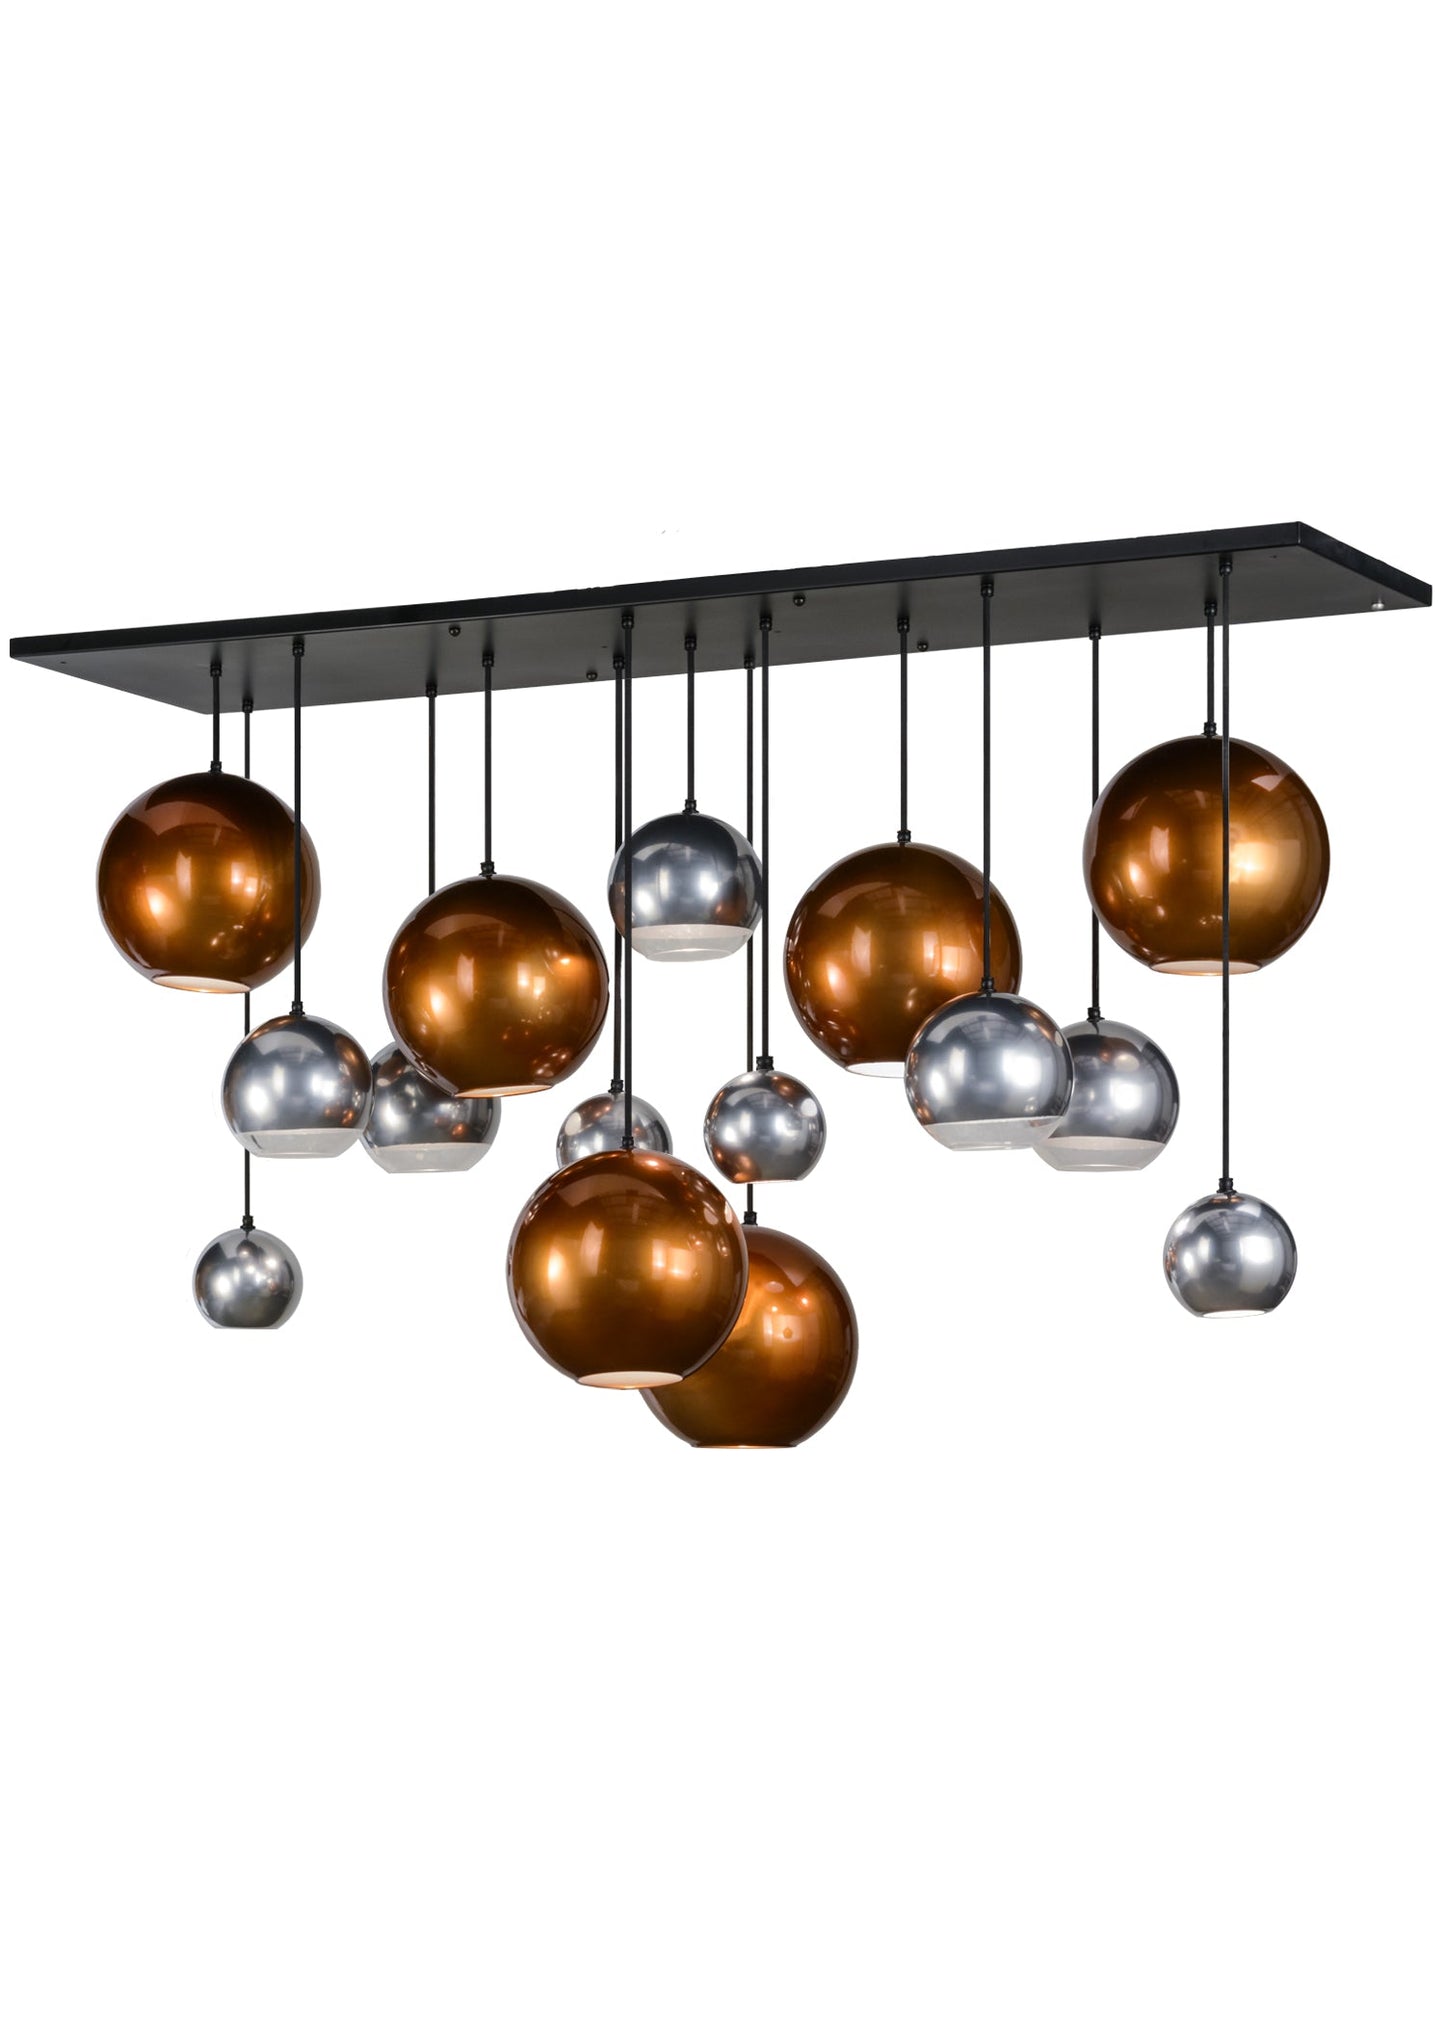 72" Bola Metalica 15-Light Cascading Pendant by 2nd Ave Lighting